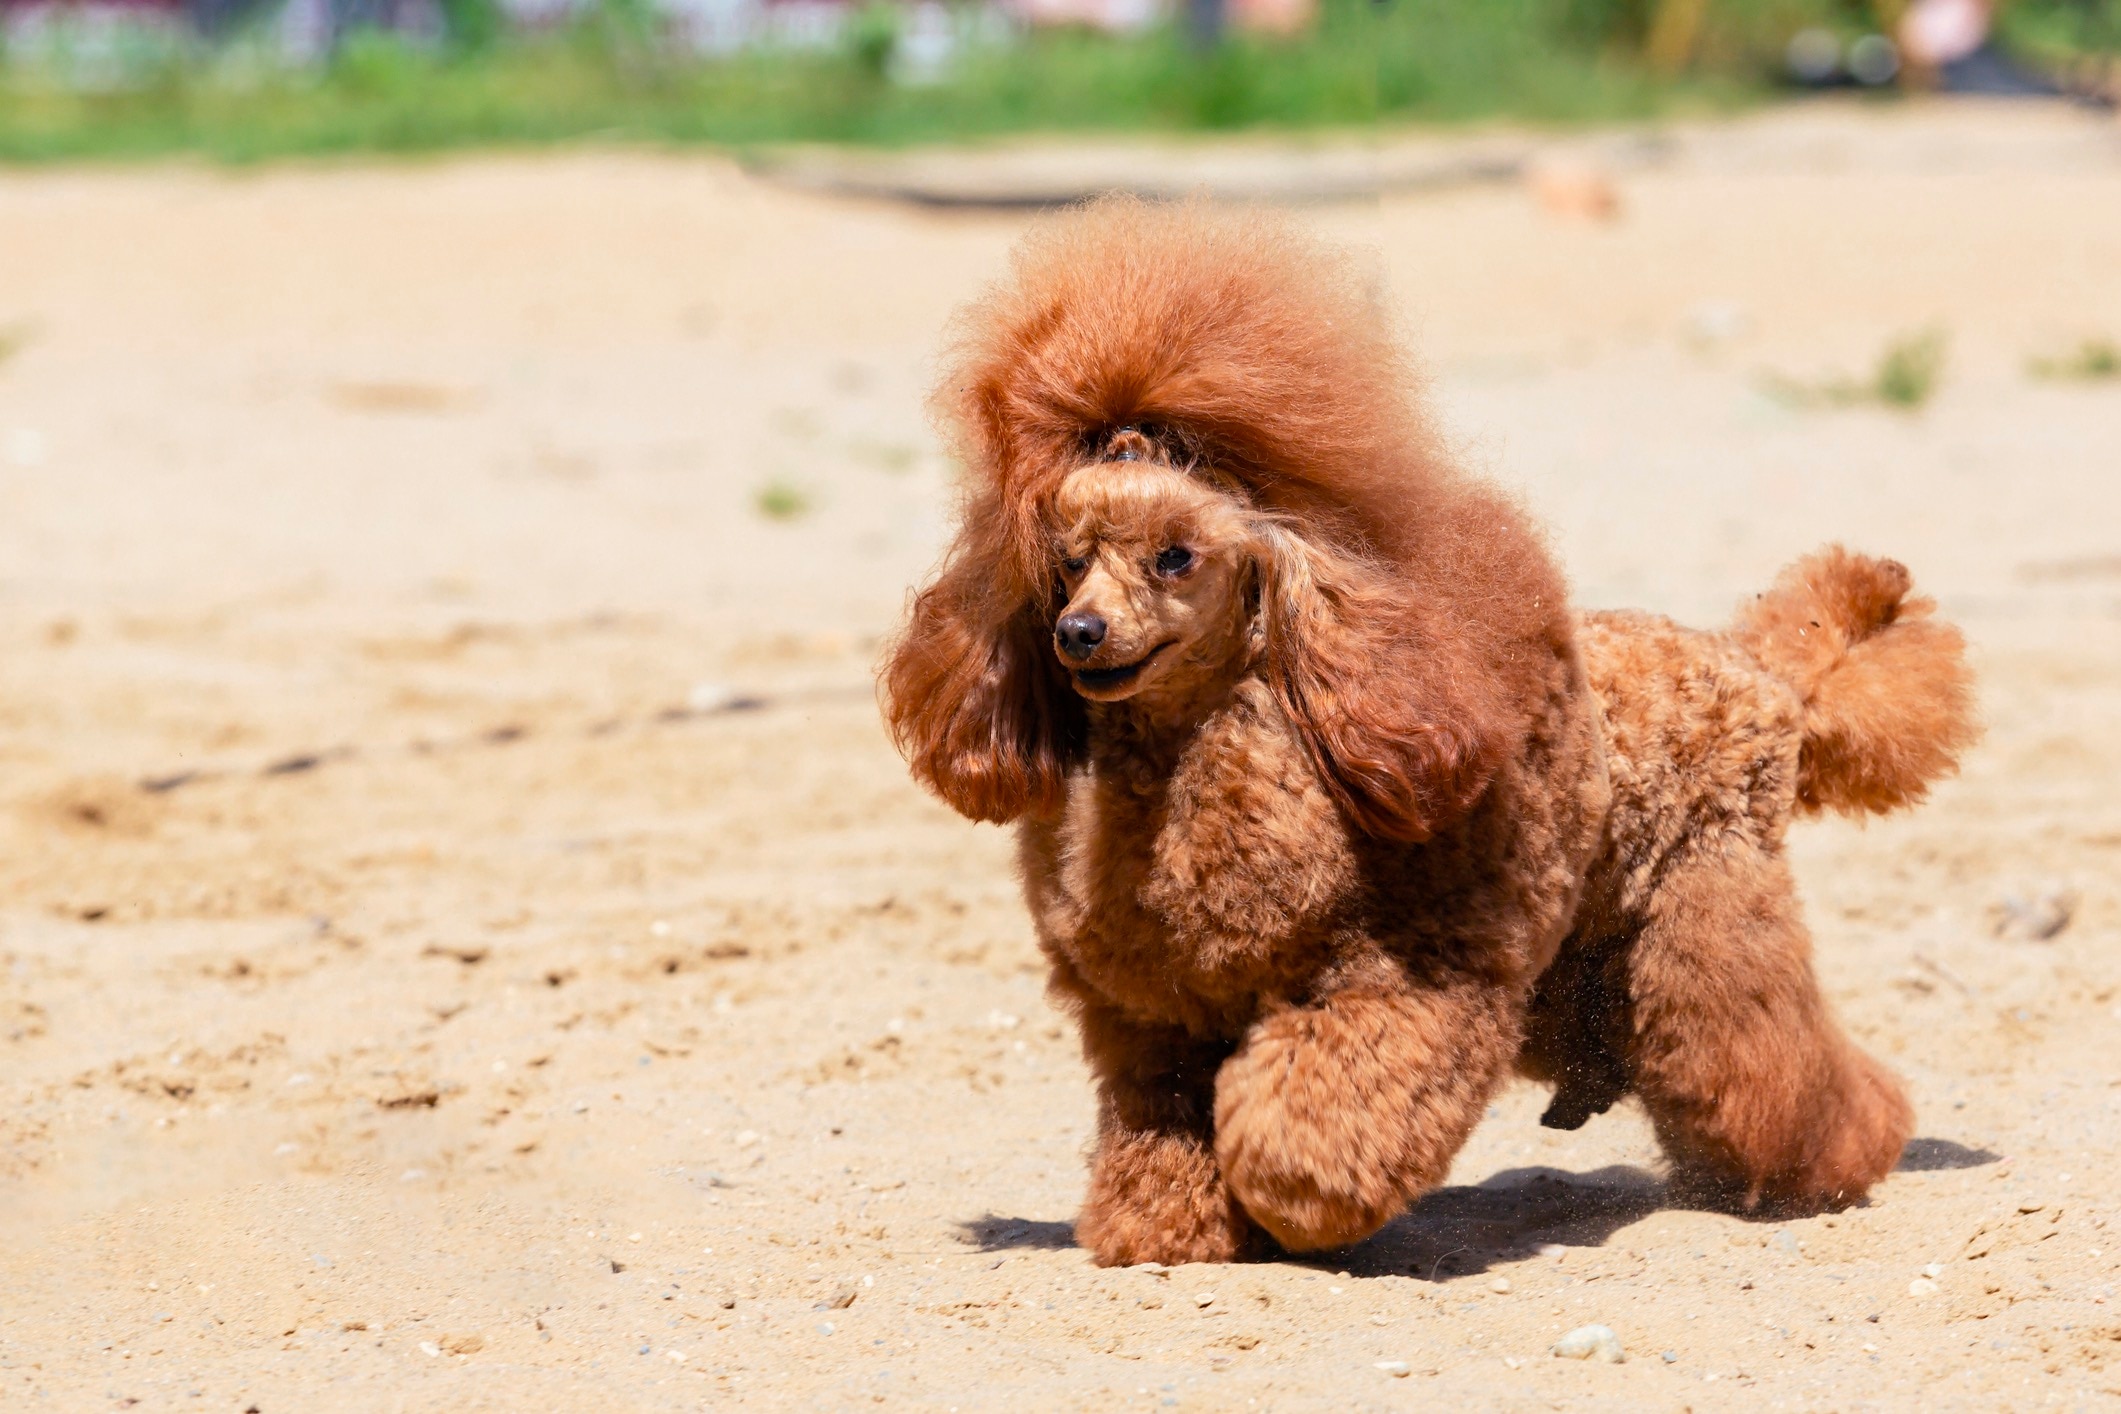 red groomed miniature poodle running across a sandy beach